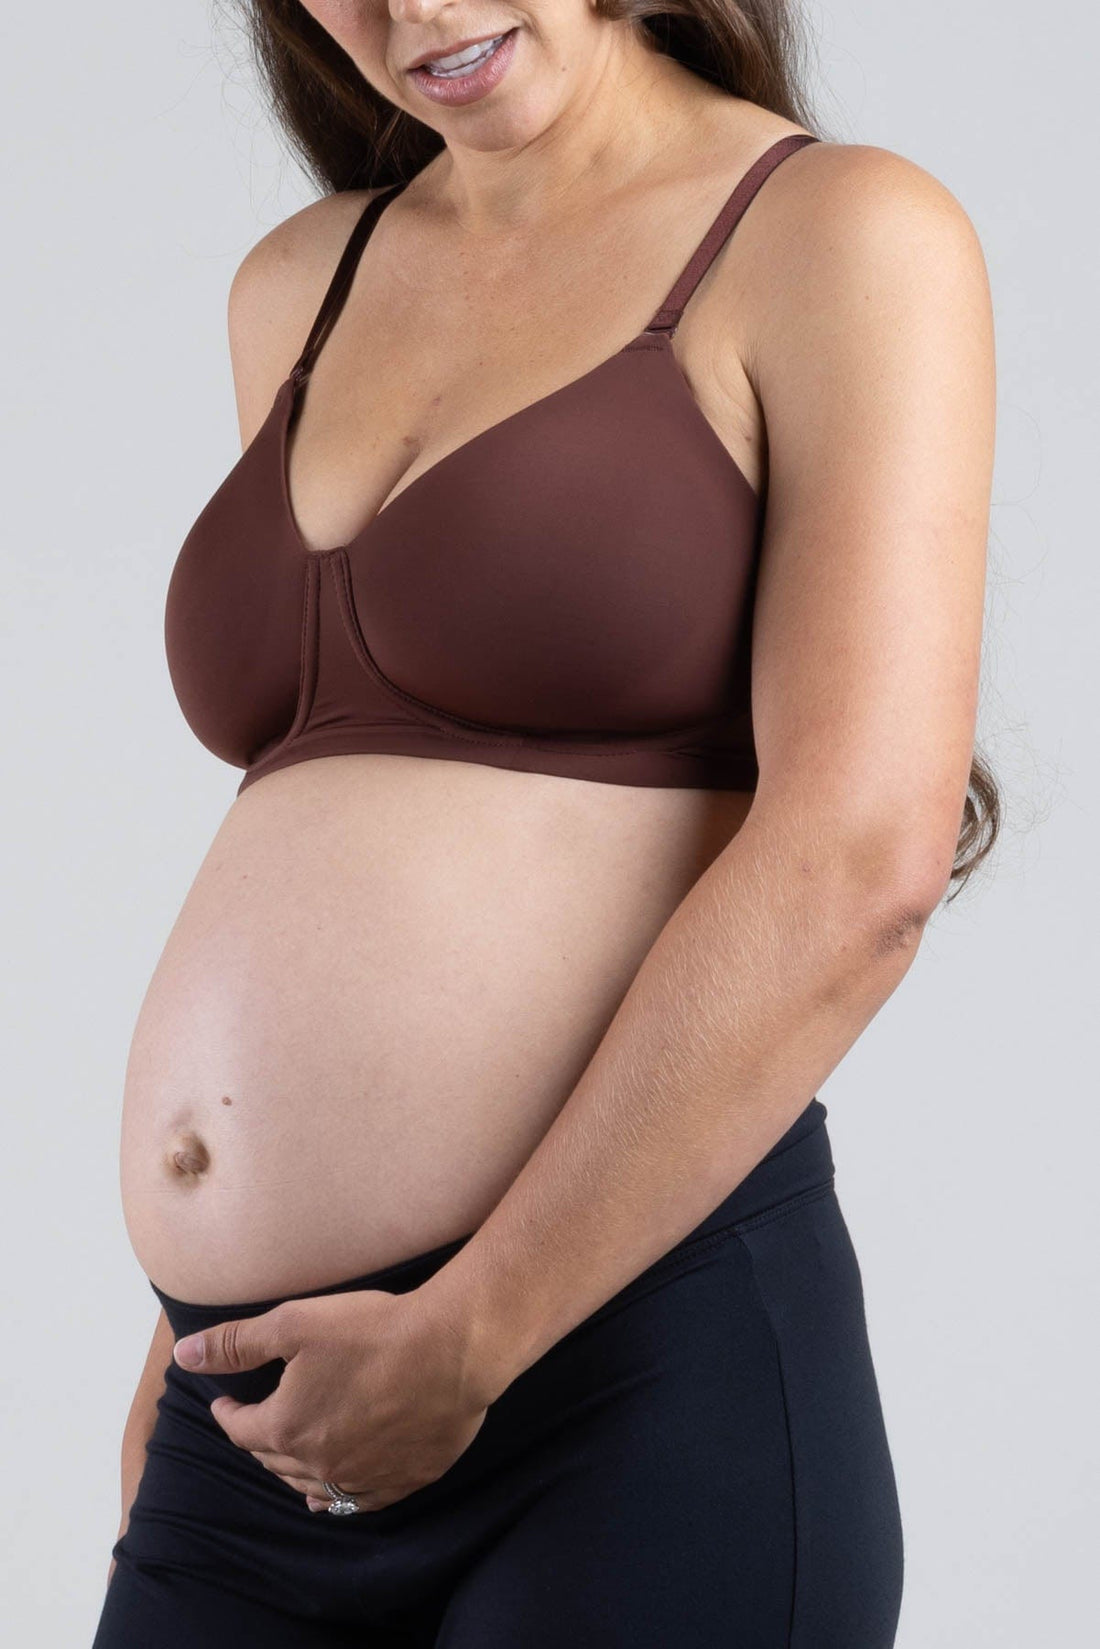 Simple Wishes Undercover nursing T-Shirt bra in bitter chocolate on pregnant model side view